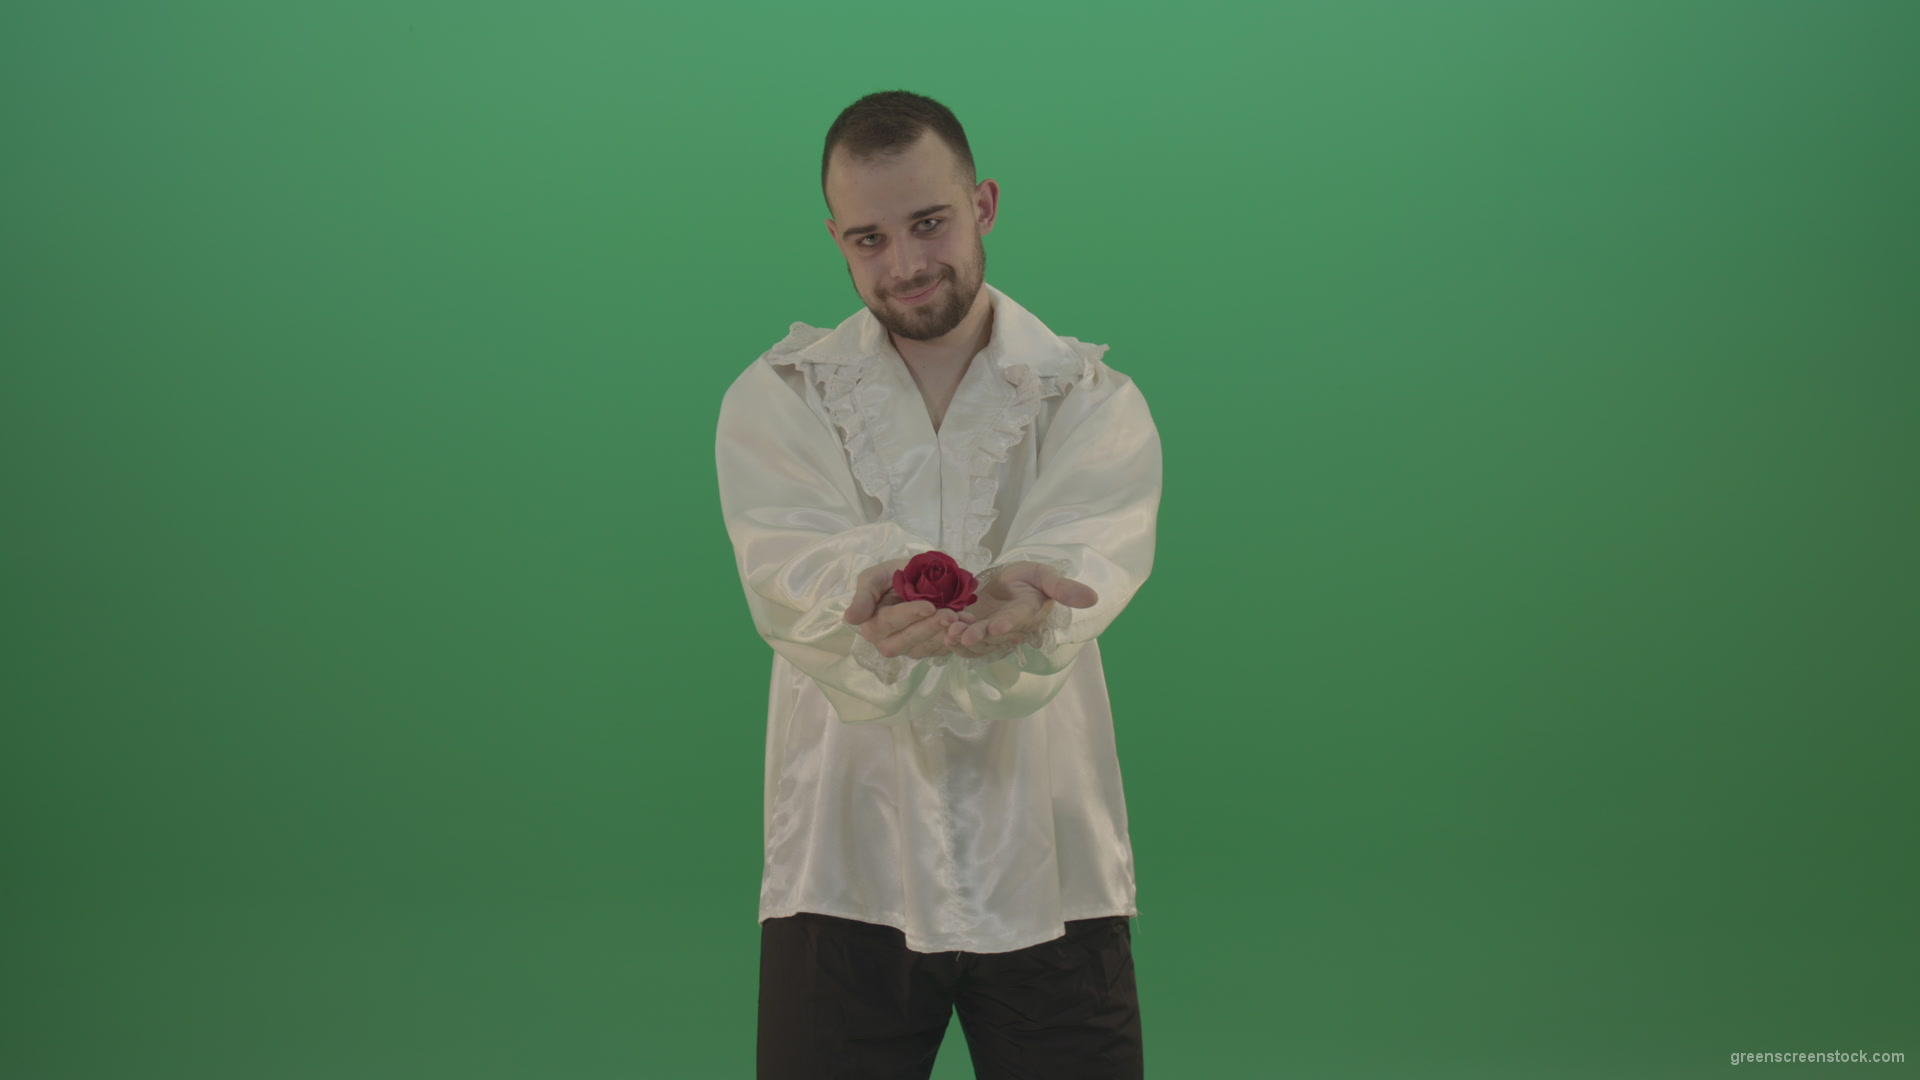 Boy-gives-flower-squeezing-in-the-sleeves-elegantly-in-hand-isolated-on-green-screen_009 Green Screen Stock